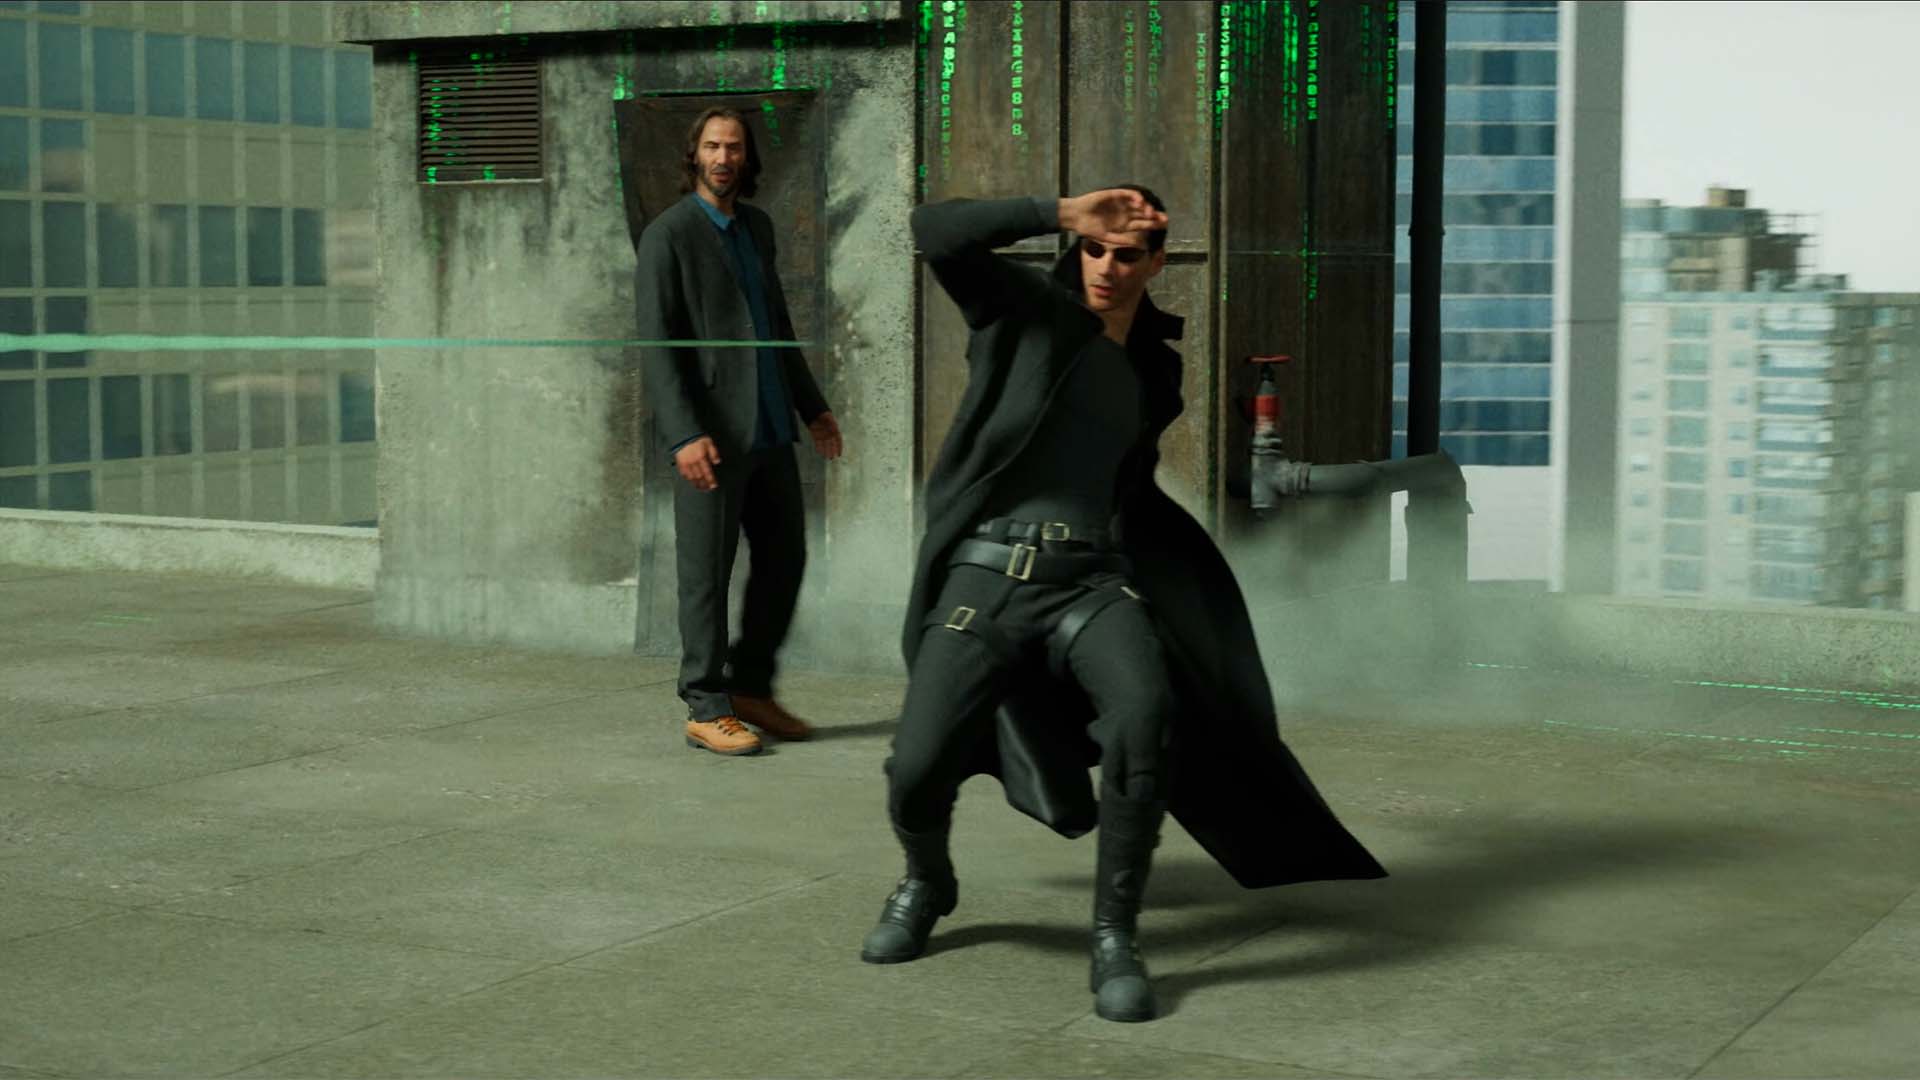 The real Keanu Reeves walks around a virtual Unreal Engine 5 recreation of the famous Bullet Time sequence from the original Matrix film.